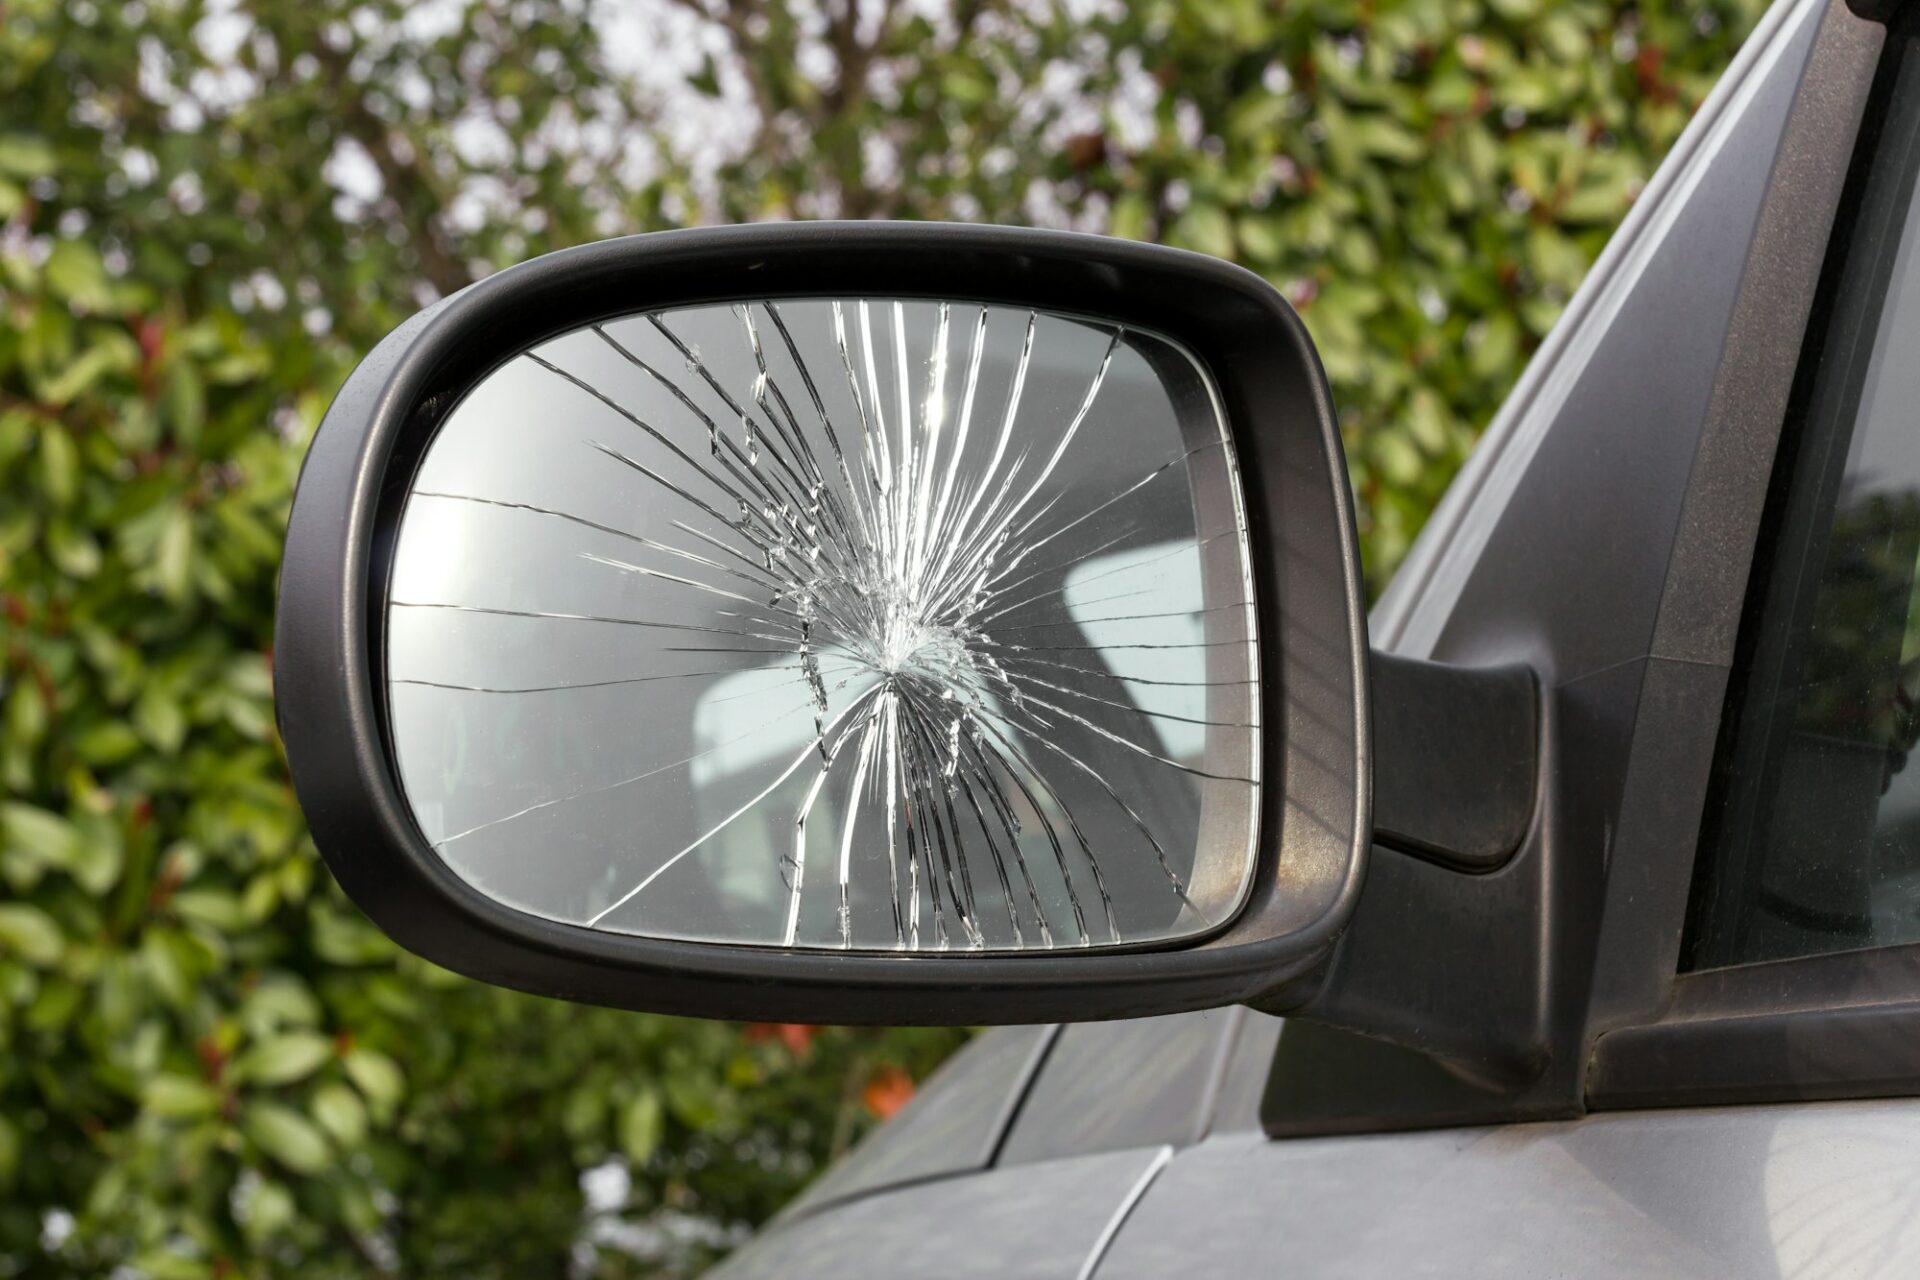 Damaged rearview mirror